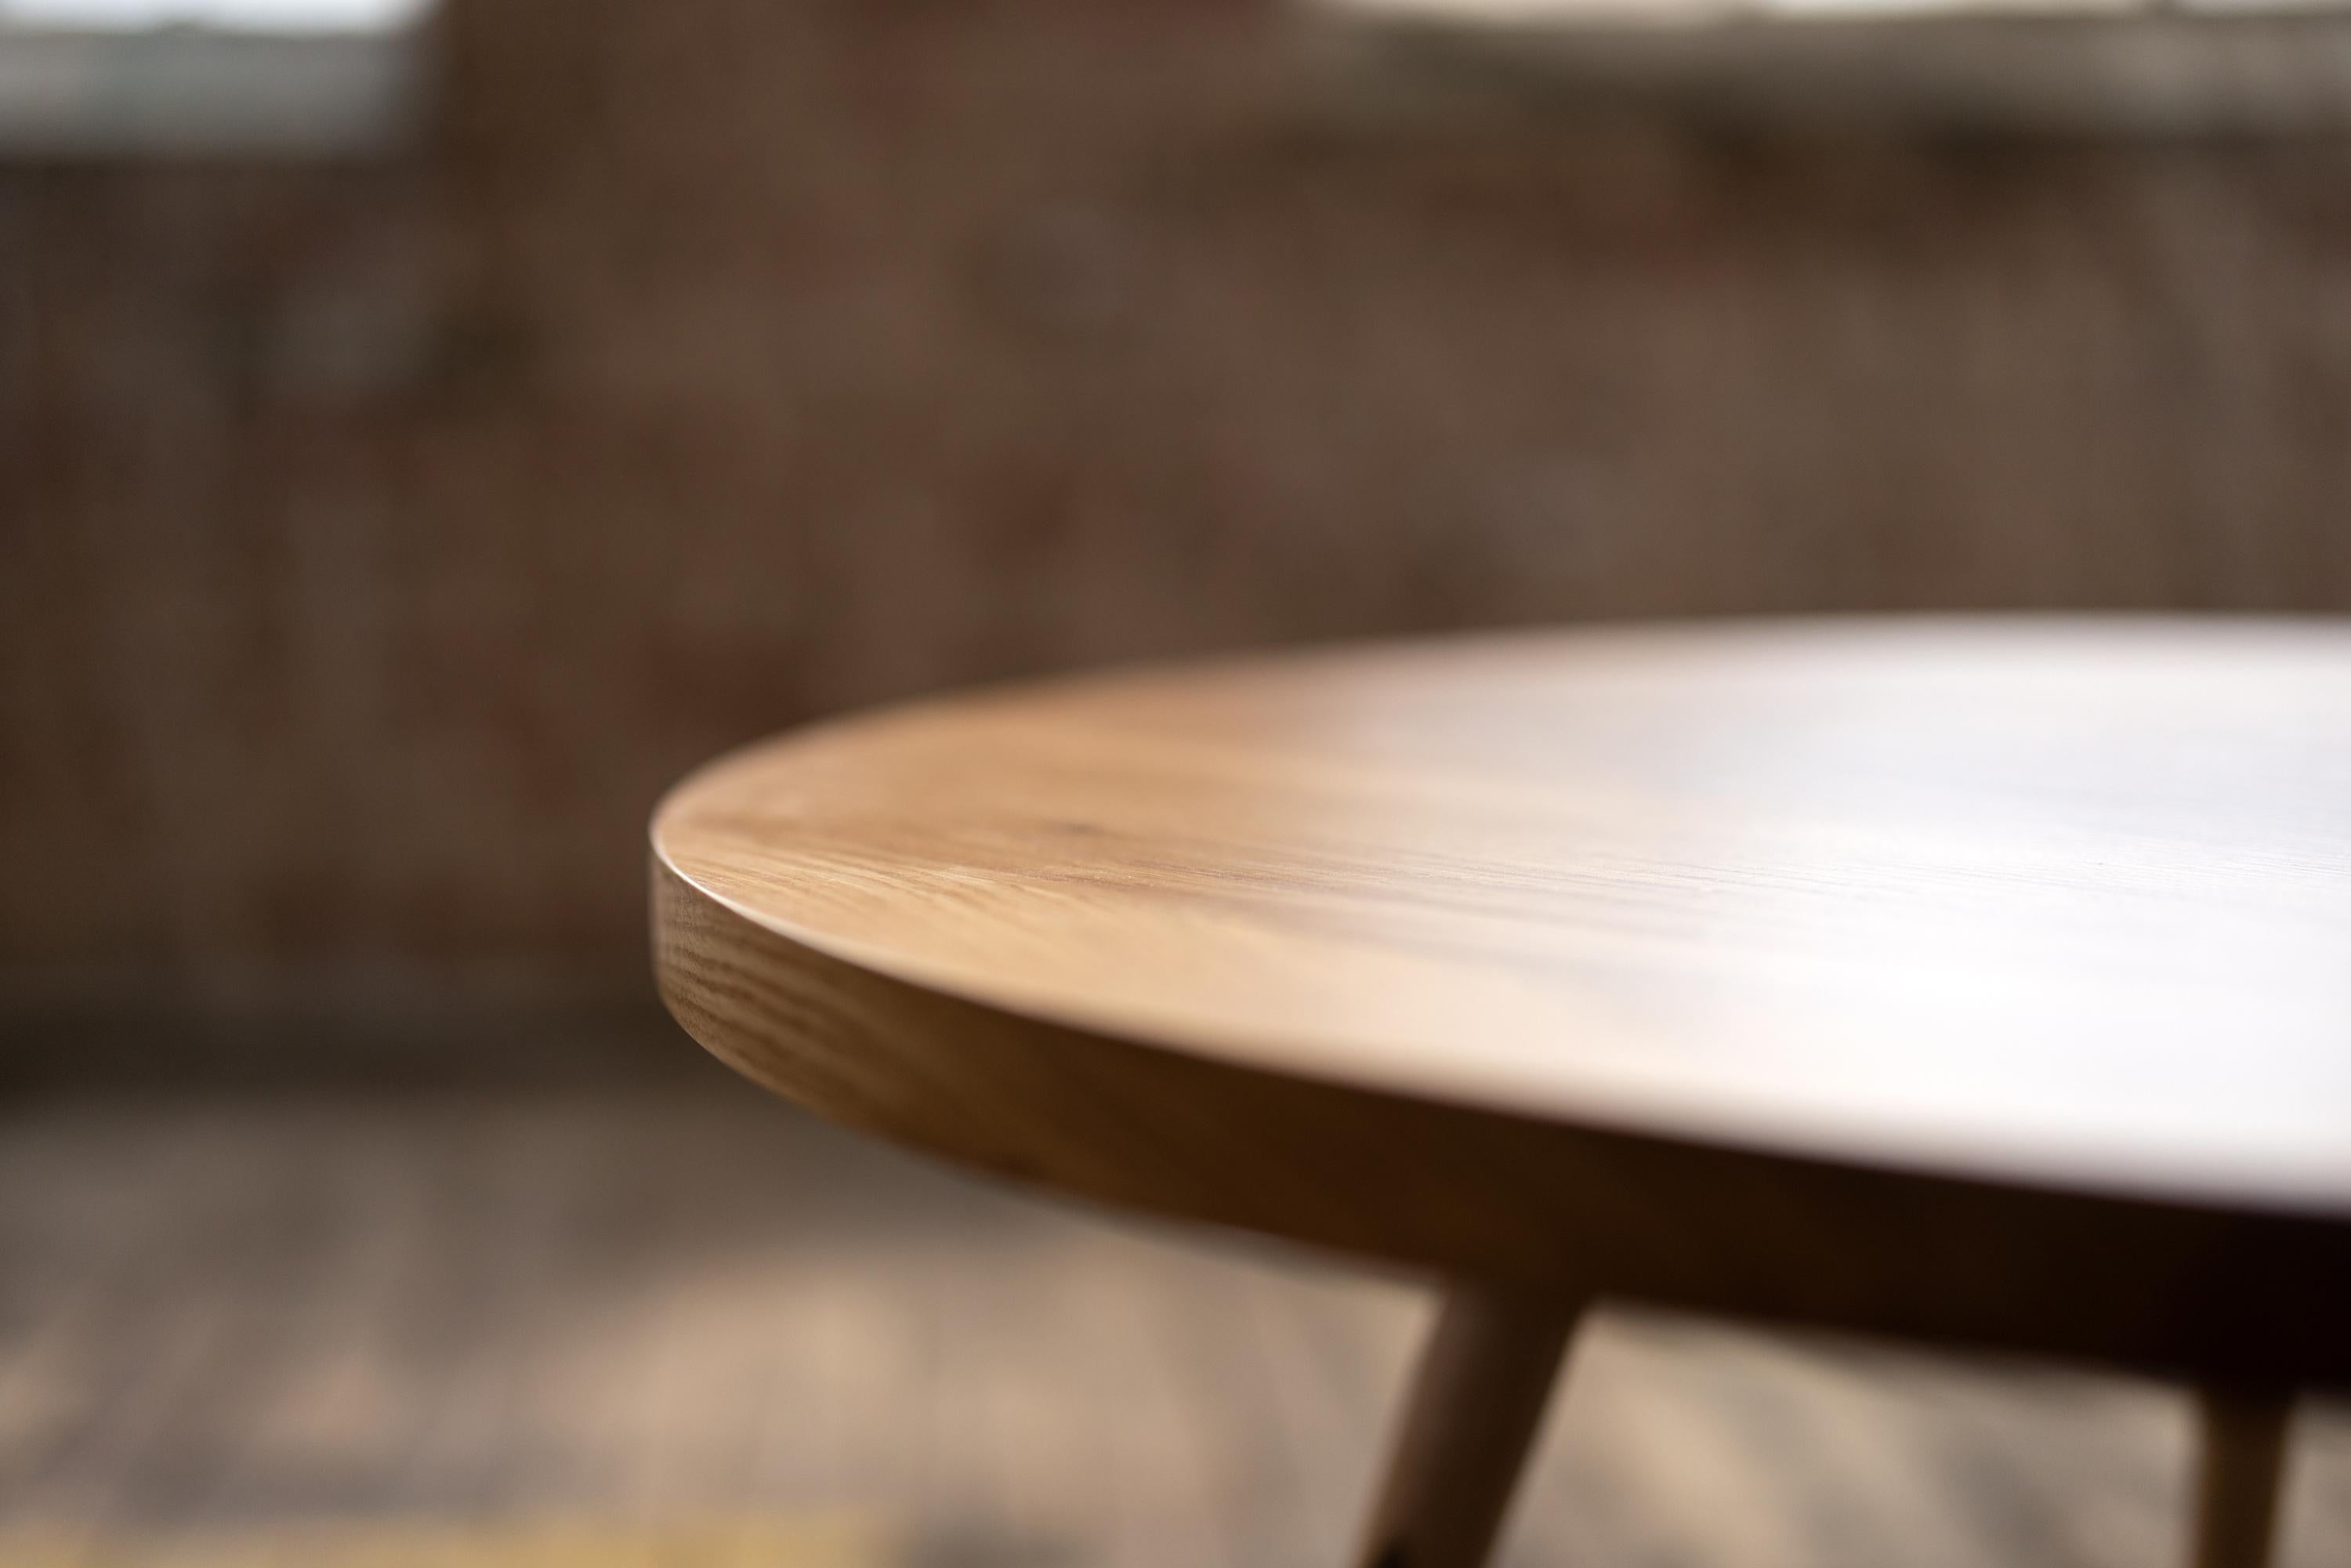 The round Velma coffee table gives a nod of respect to Mid Century Modern inspired design and craft. The sleek maple legs are hand turned on the lathe. Discreet walnut details combine with the expressive grain of urban wood to present a clean and